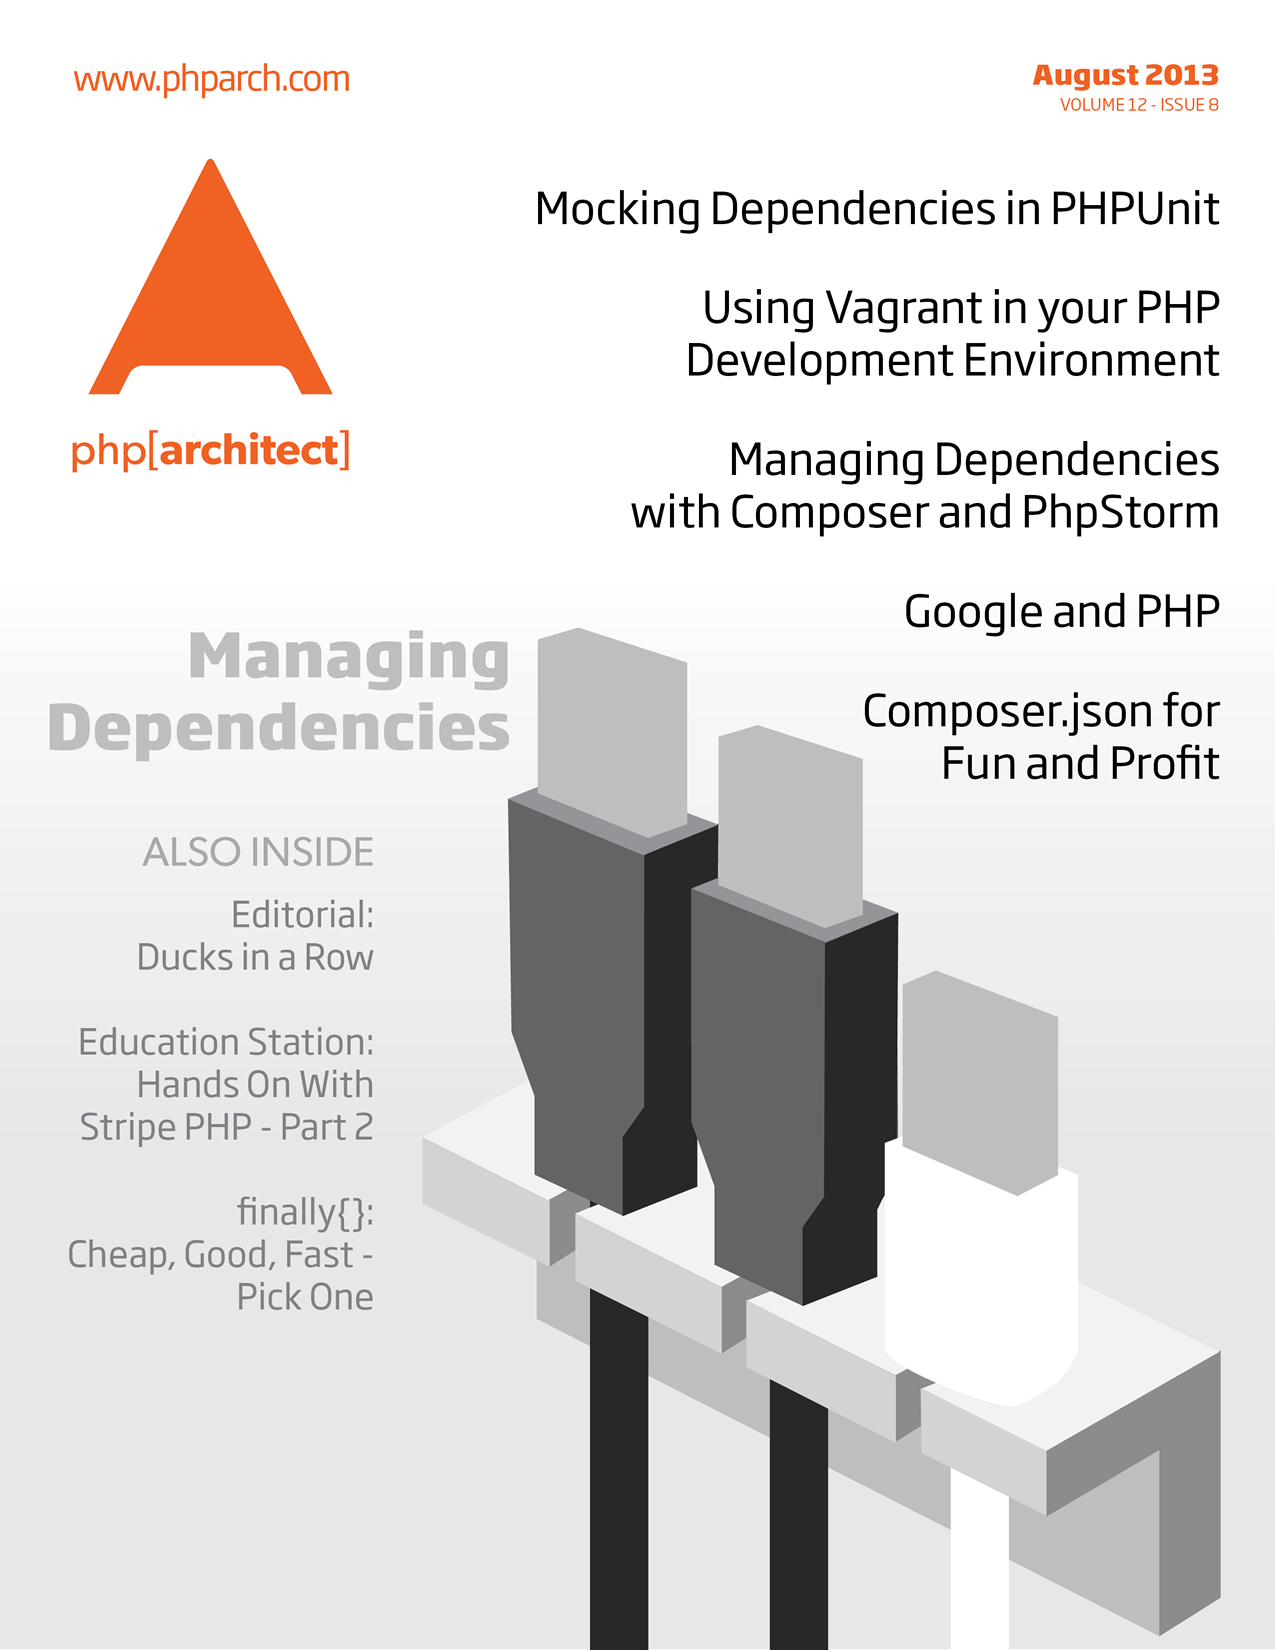 php[architect] August 2013 - Managing Dependencies